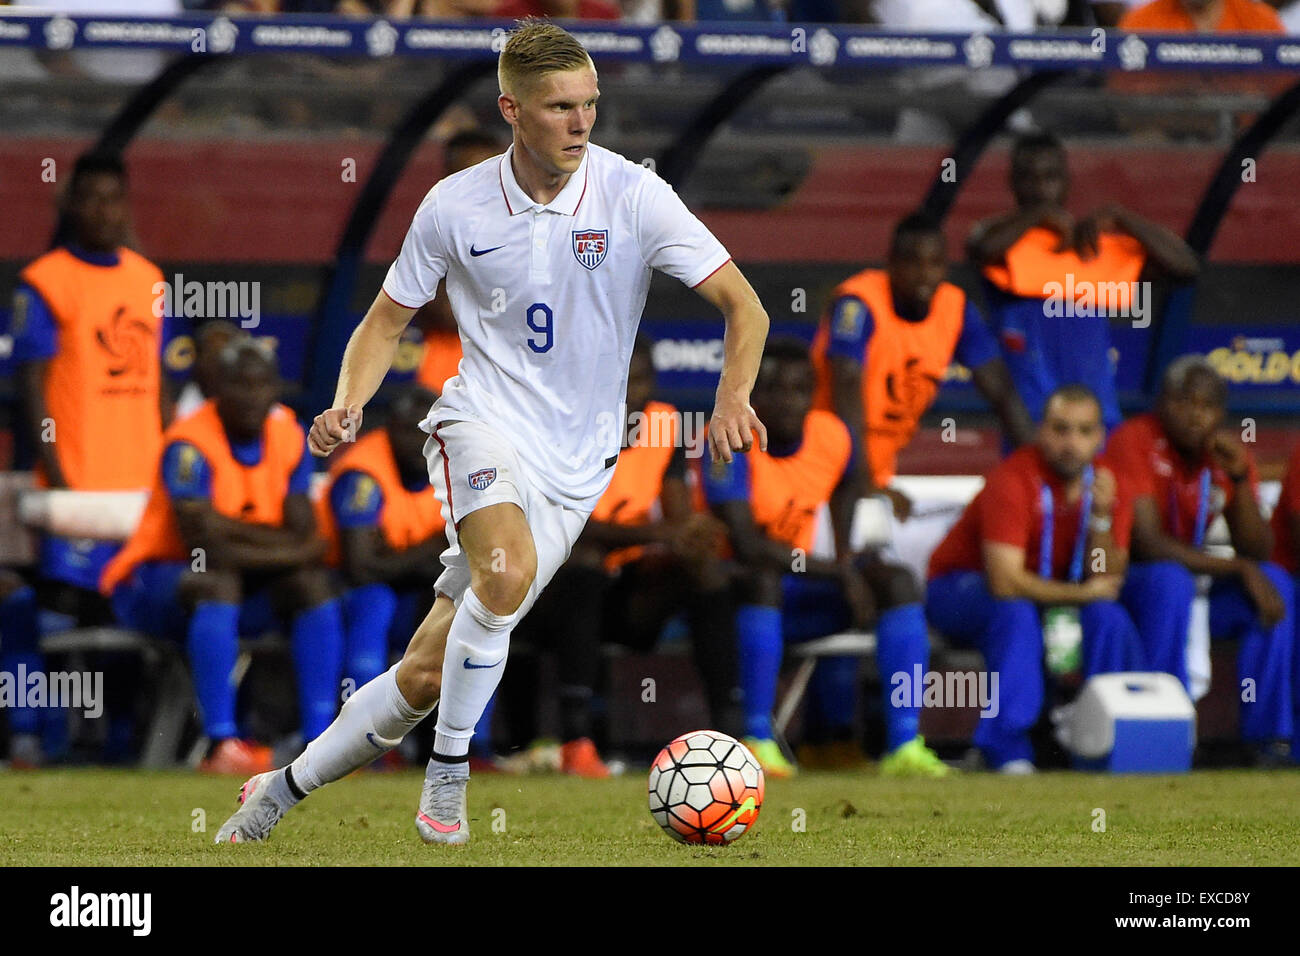 Foxborough, Massachusetts, USA. 10th July, 2015. United States forward Aron Johannsson (9) in game action during the CONCACAF Gold Cup group stage match between USA and Haiti held at Gillette Stadium, in Foxborough Massachusetts. USA defeated Haiti 1-0. Eric Canha/CSM/Alamy Live News Stock Photo